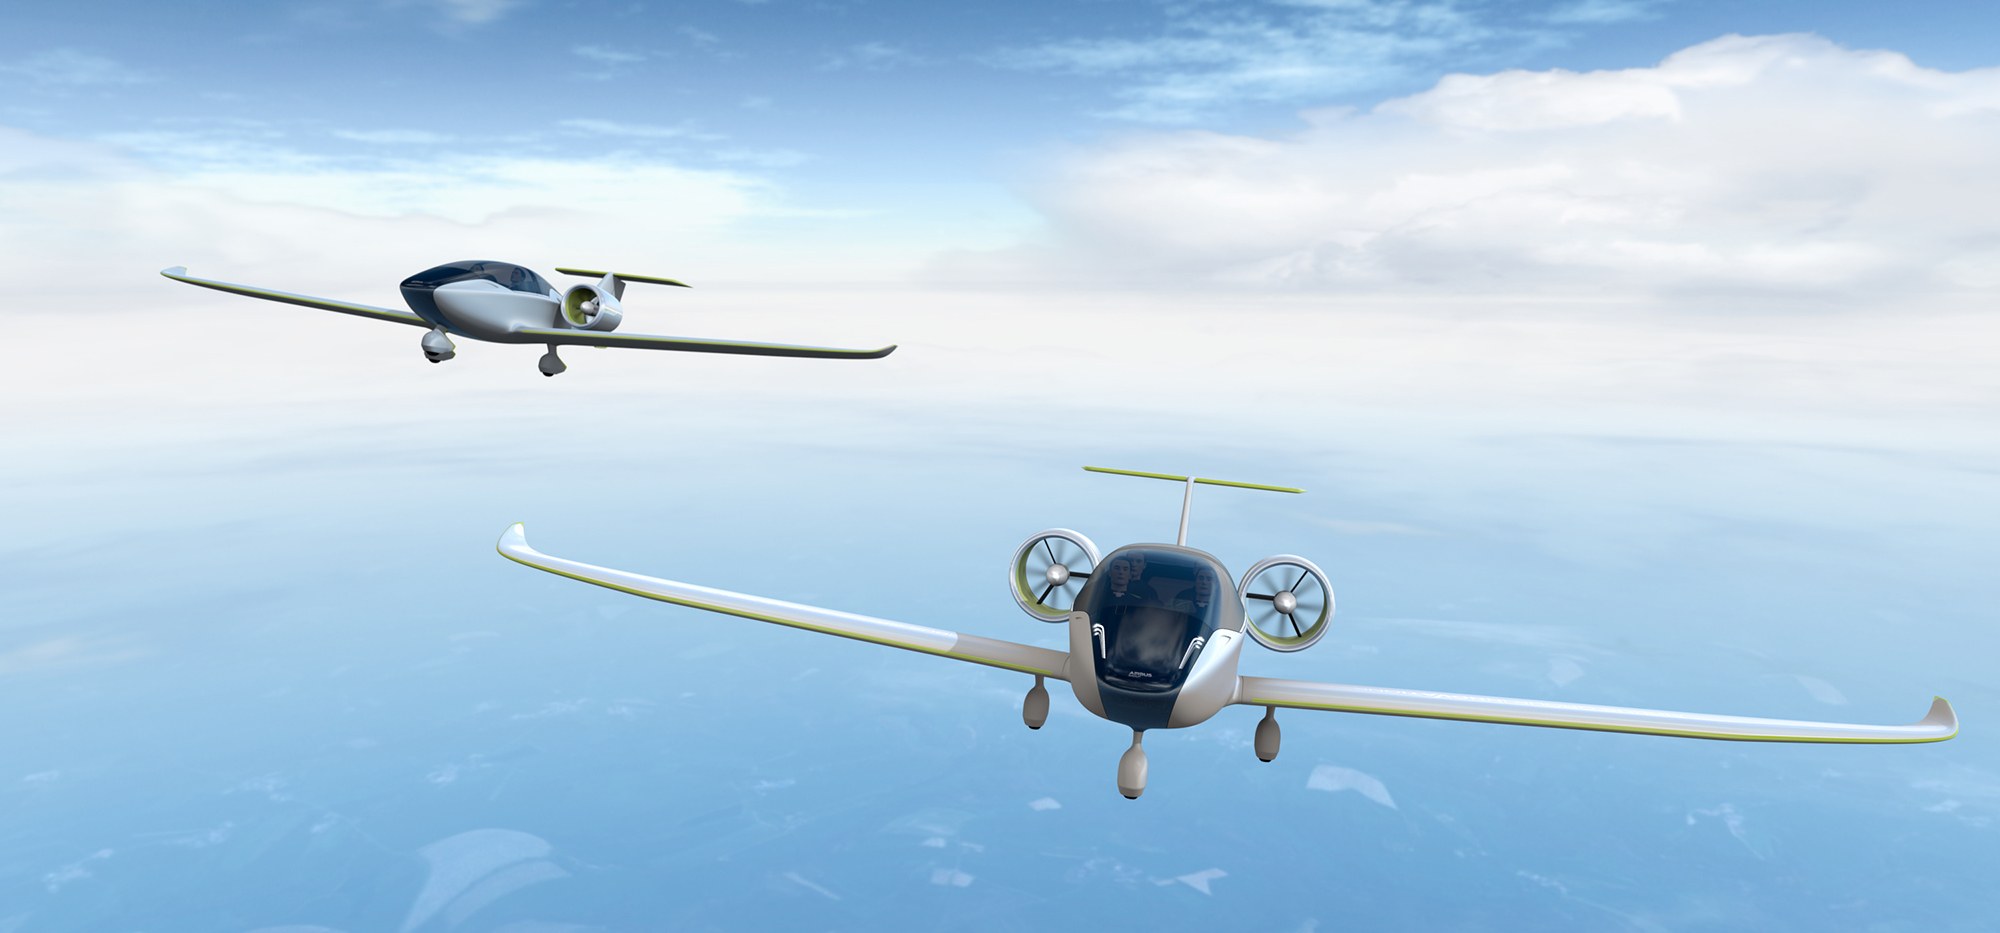 Airbus began to develop races of electric airplanes